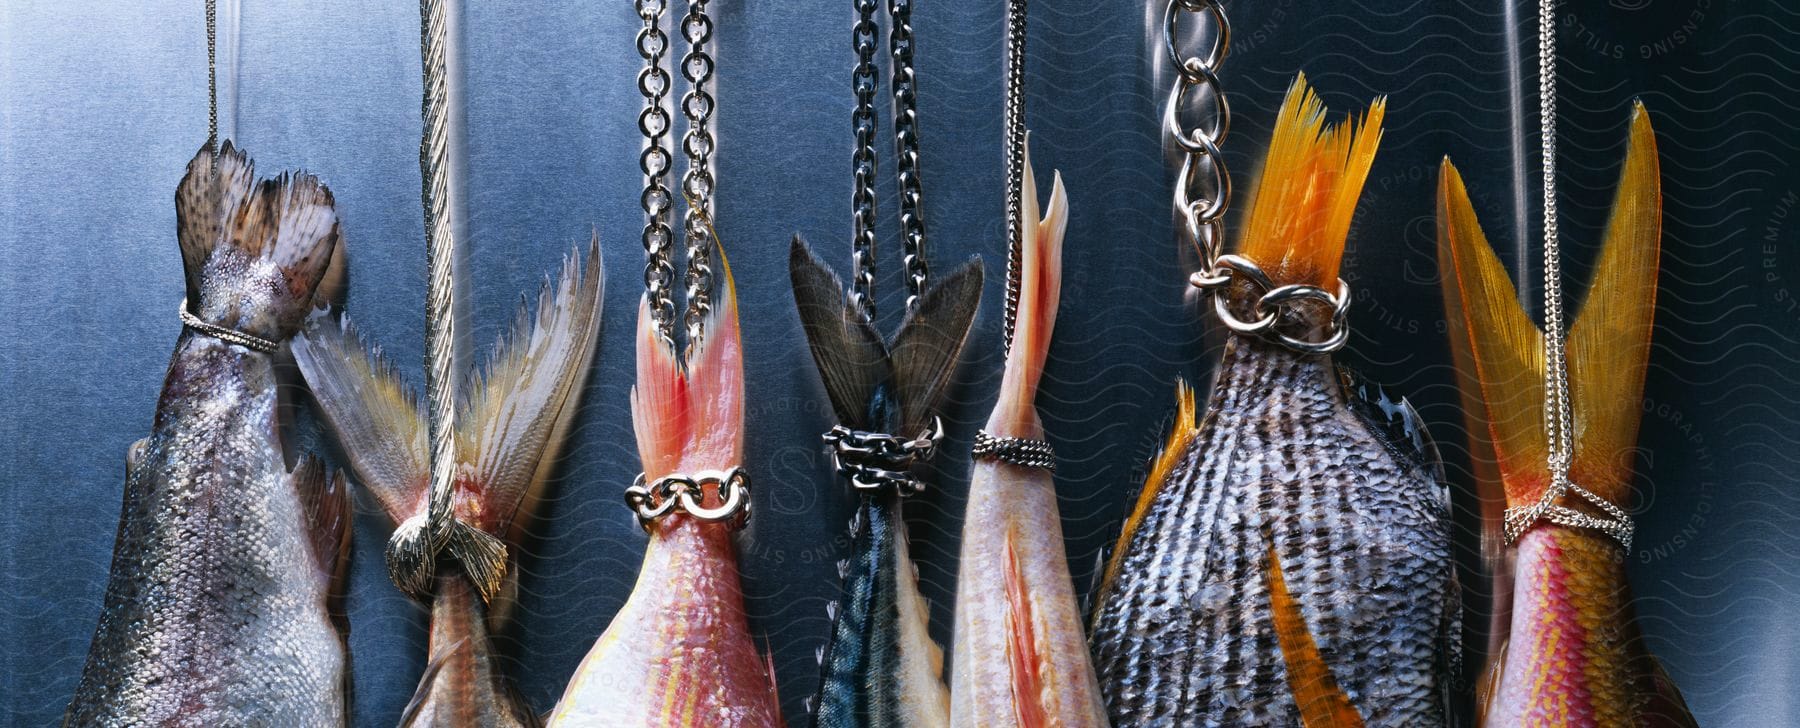 Closeup photography of seven different fish hanging by their caudal fins with chains and jewelry